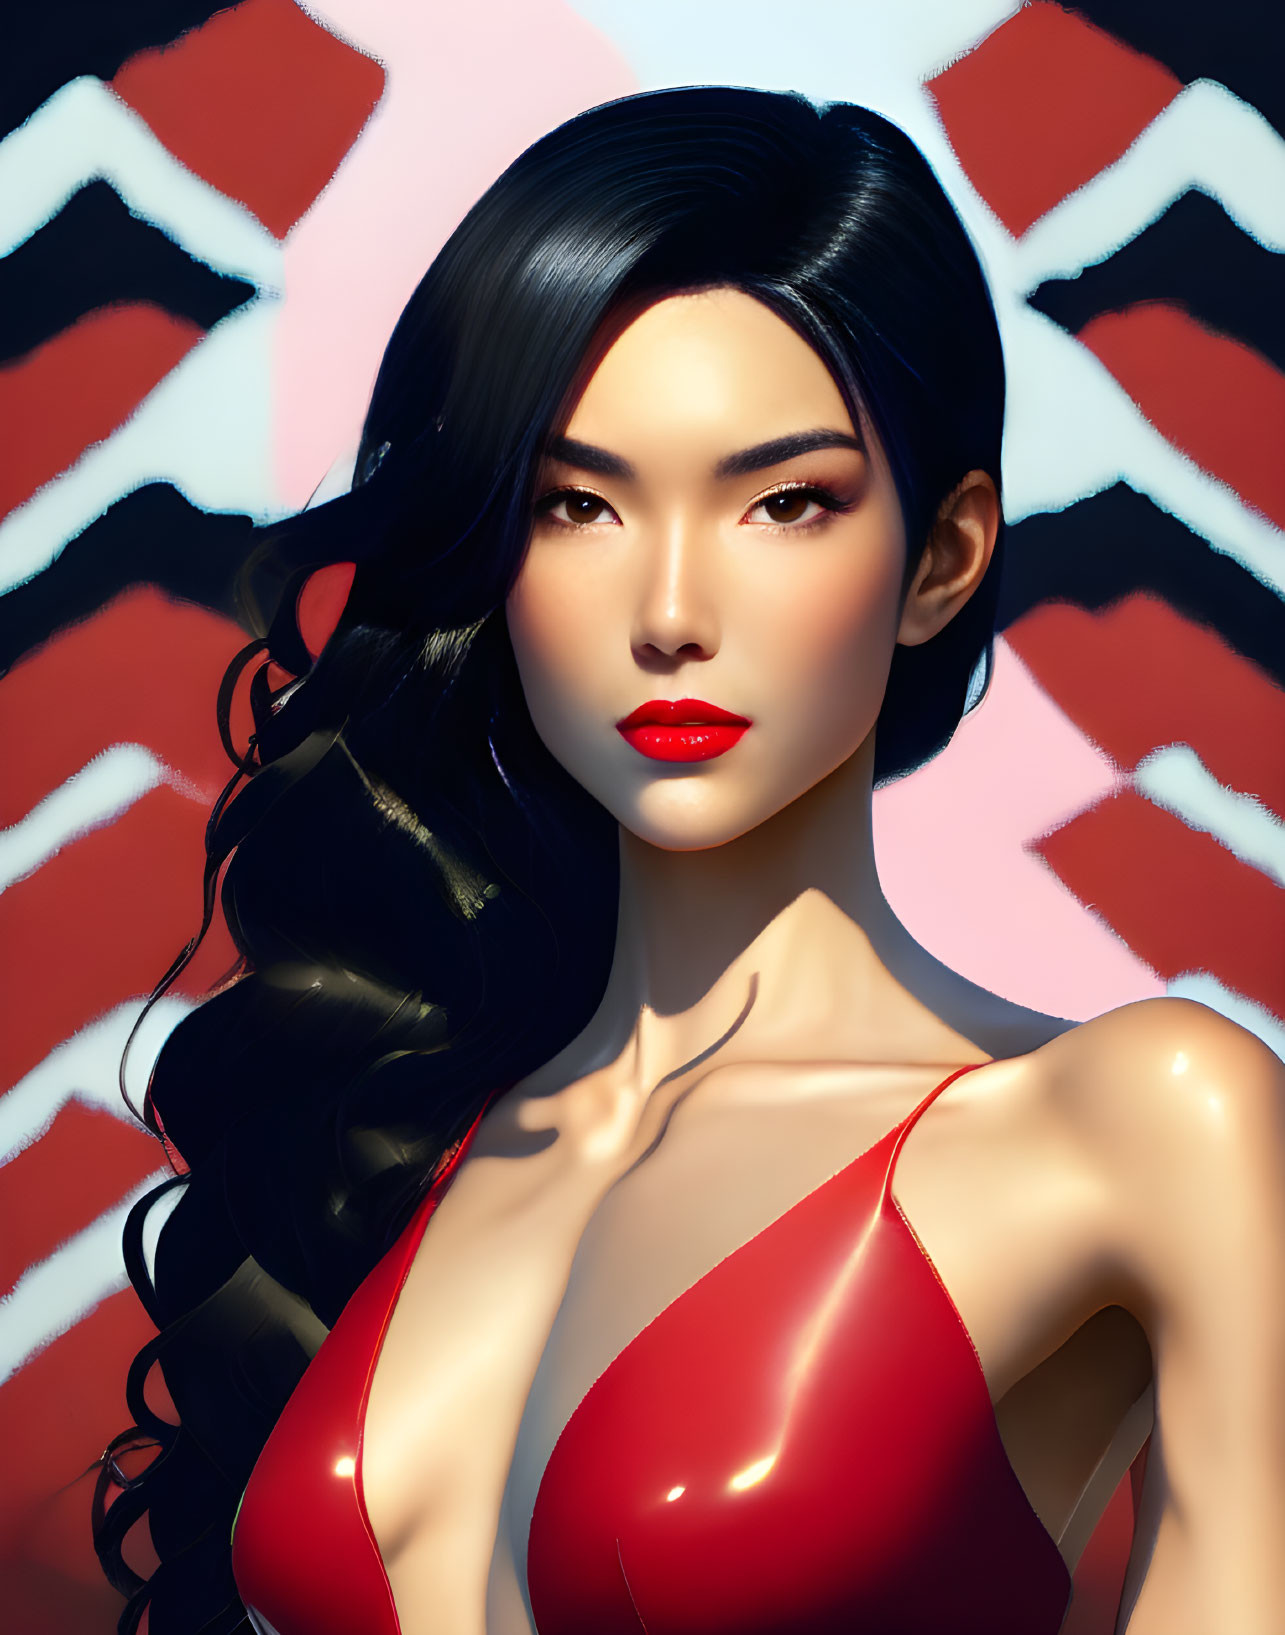 Illustrated portrait of woman with long black hair and red lips in red top on zigzag background